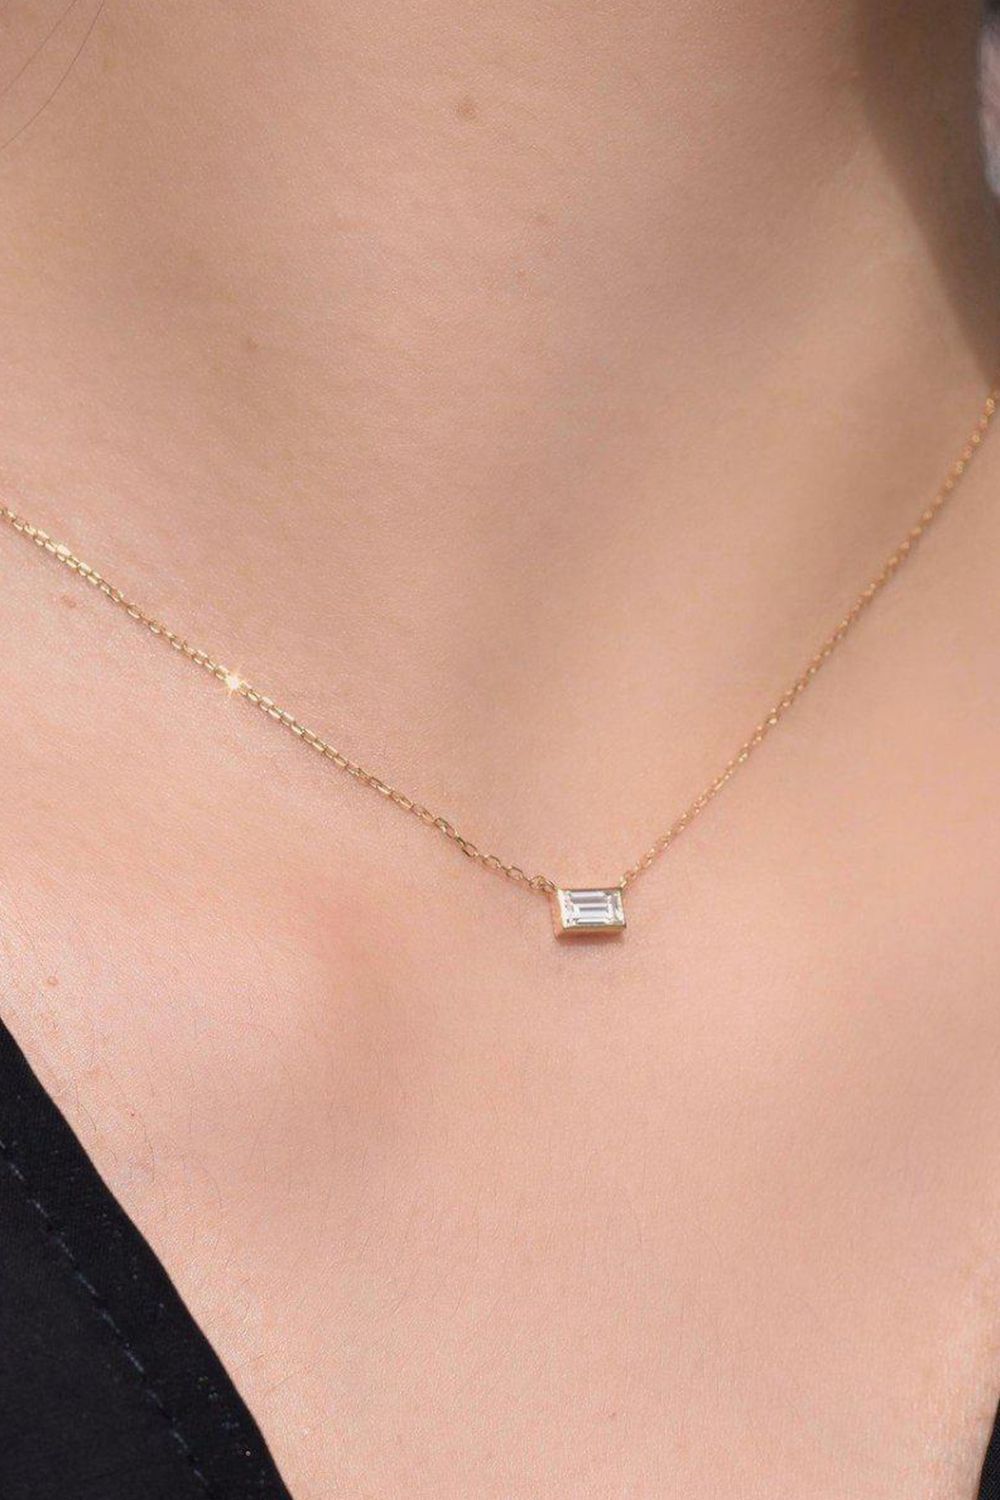 GYPPHY - BUGUETTE CUT MOISSANITE NECKLACE / バゲット カット